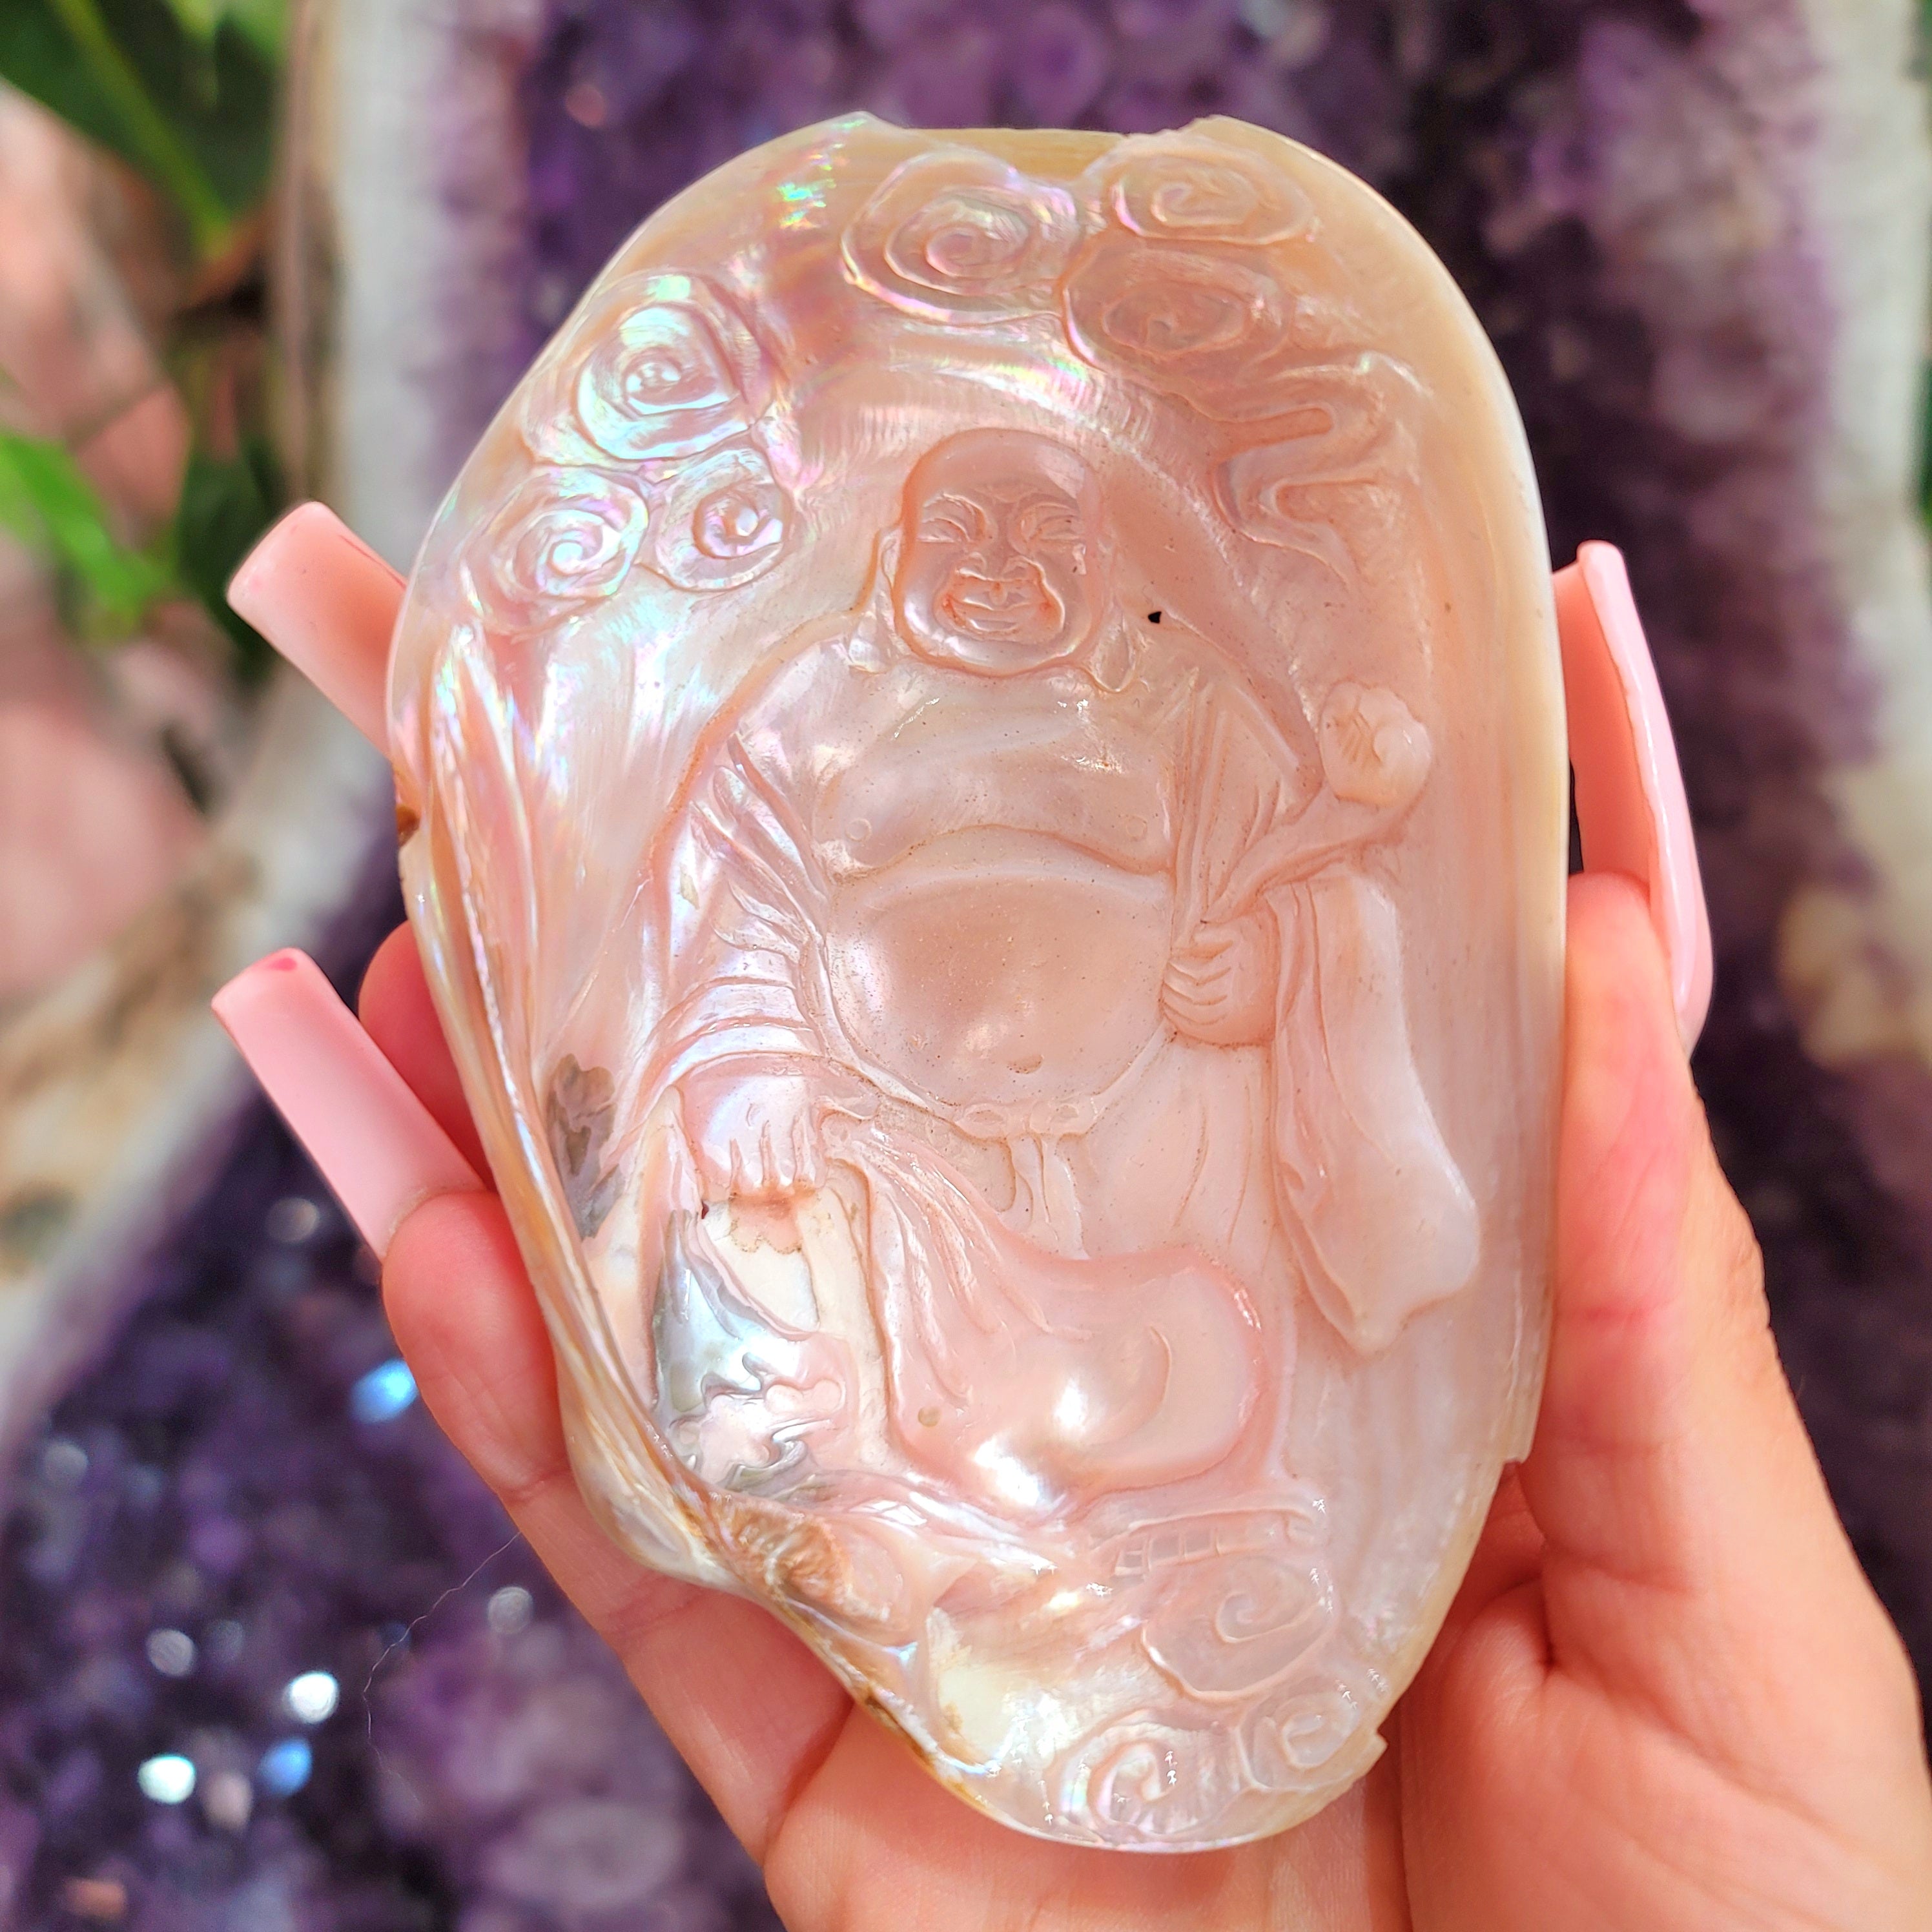 Abalone Shell Bowl Carved Laughing Buddah for Soothing Anxiety, Promoting Compassion and Love